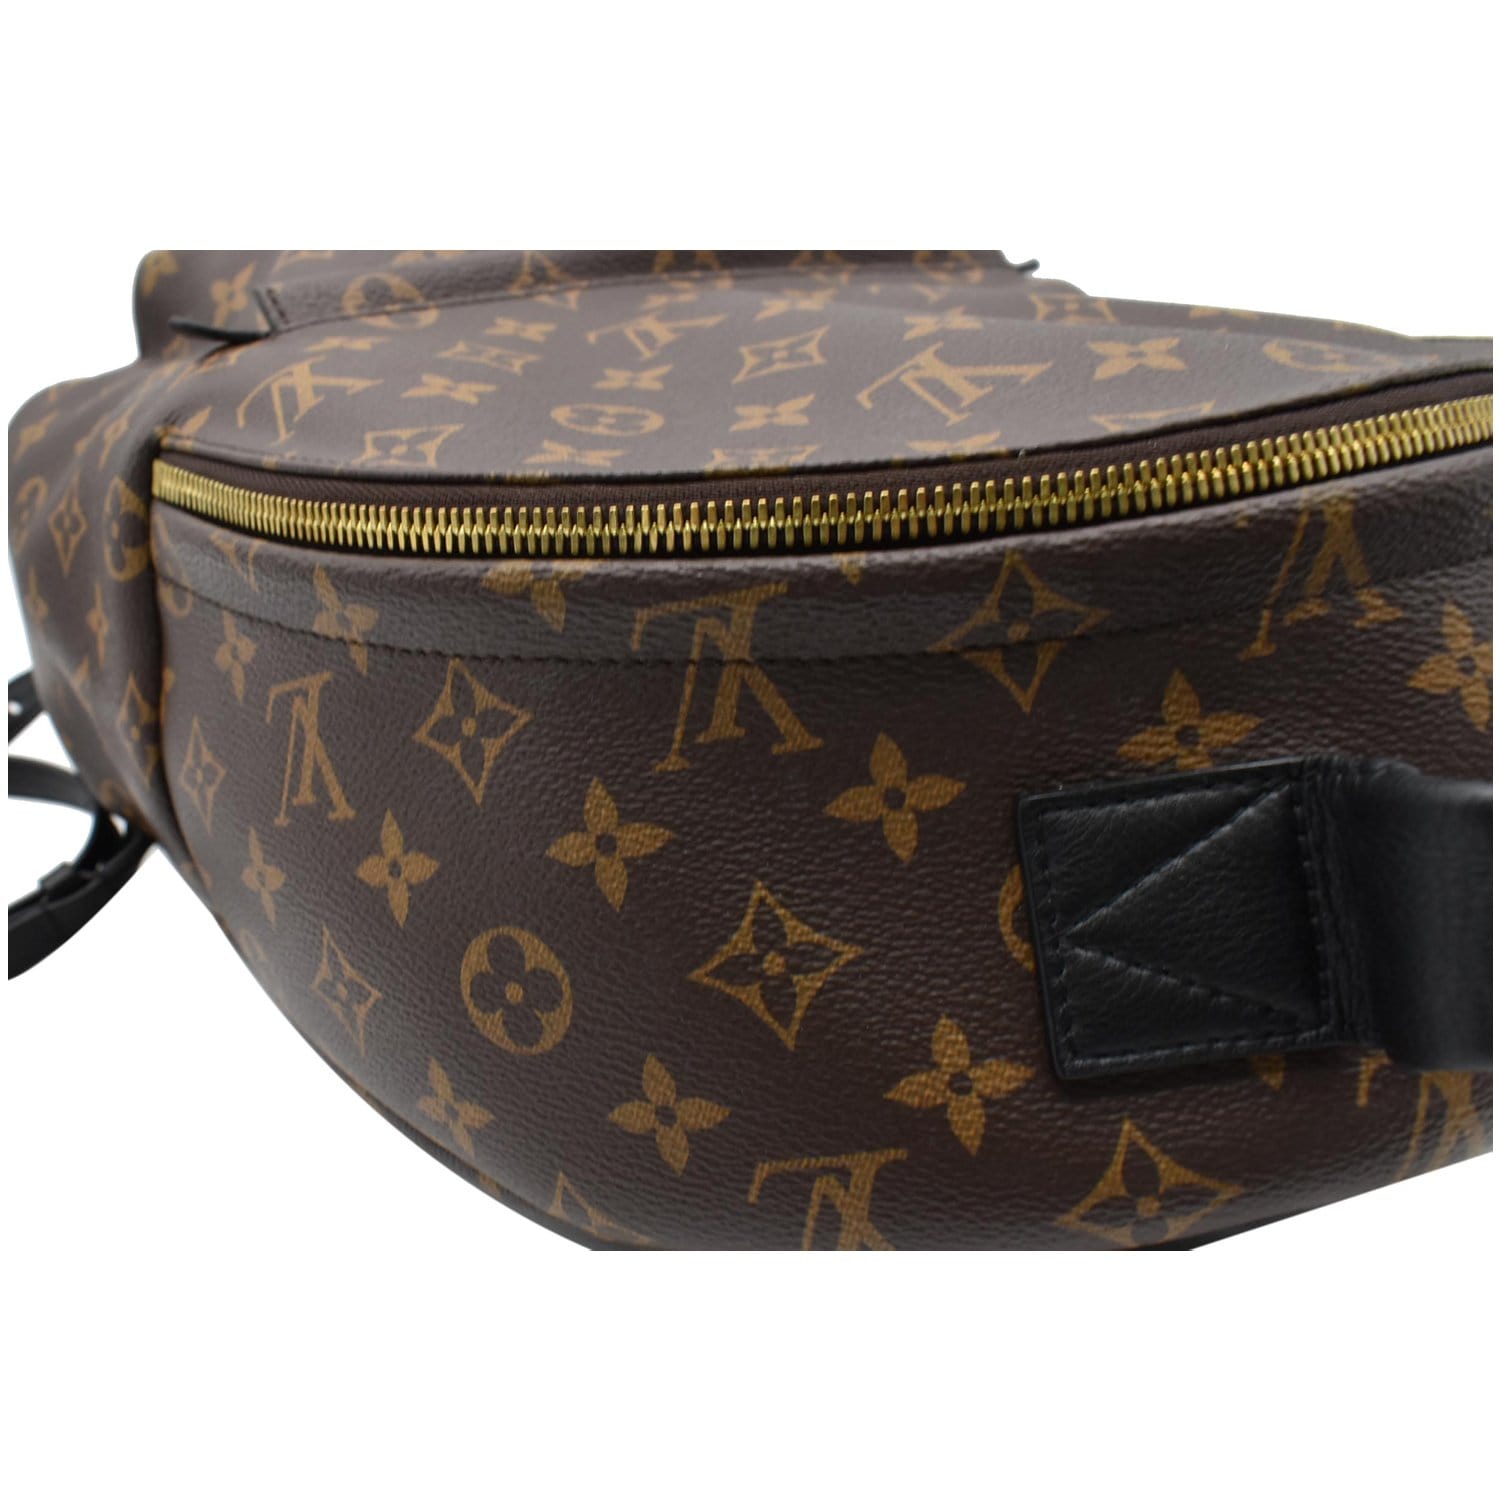 Palm springs cloth backpack Louis Vuitton Brown in Cloth - 26808678